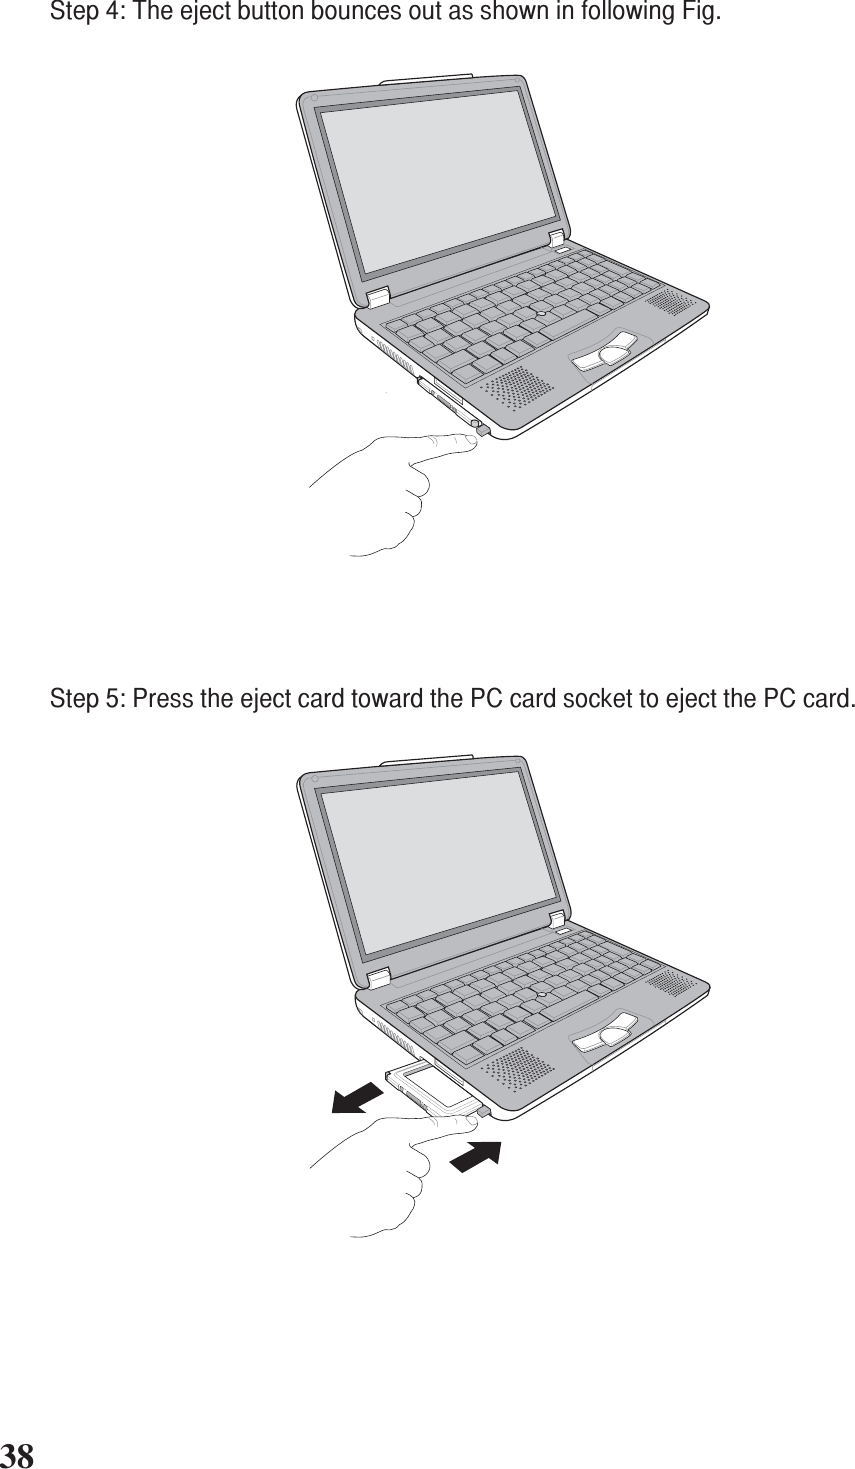 38+-+-Step 5: Press the eject card toward the PC card socket to eject the PC card.Step 4: The eject button bounces out as shown in following Fig.